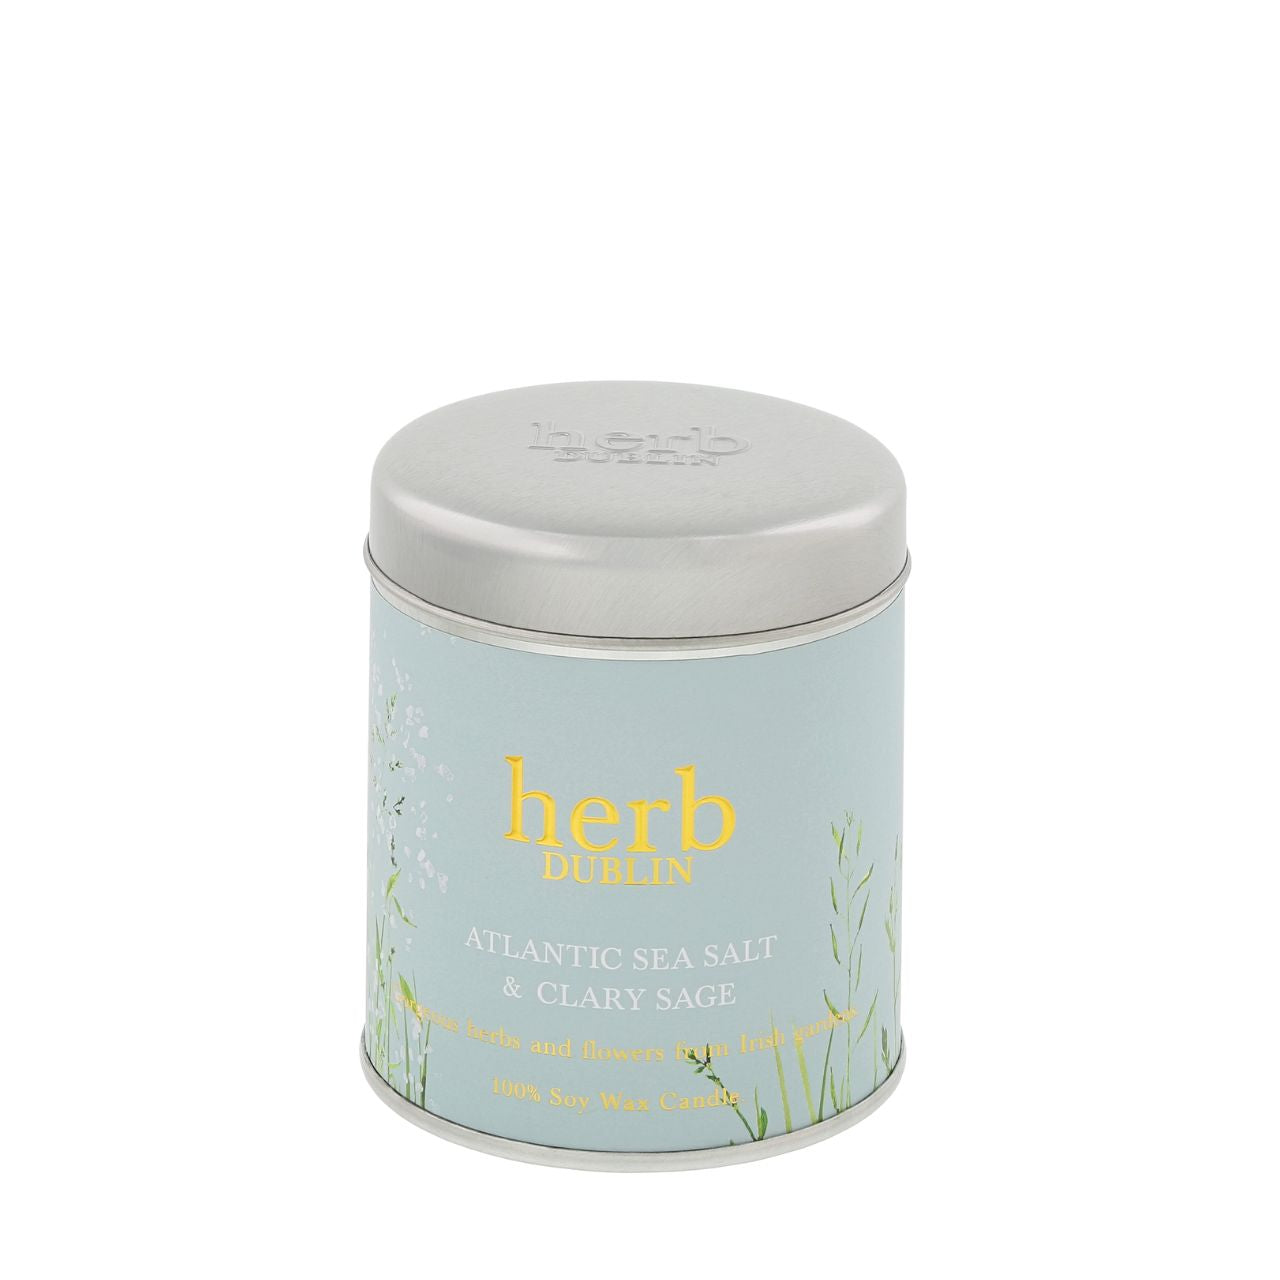 We’ve left the garden and headed to the sea. Fresh Atlantic sea salt and gorgeous coastal elements make this our most light and fresh and Irish scent! We have captured this gorgeous scent for you, available in tins (idea for travel) and jar candles.